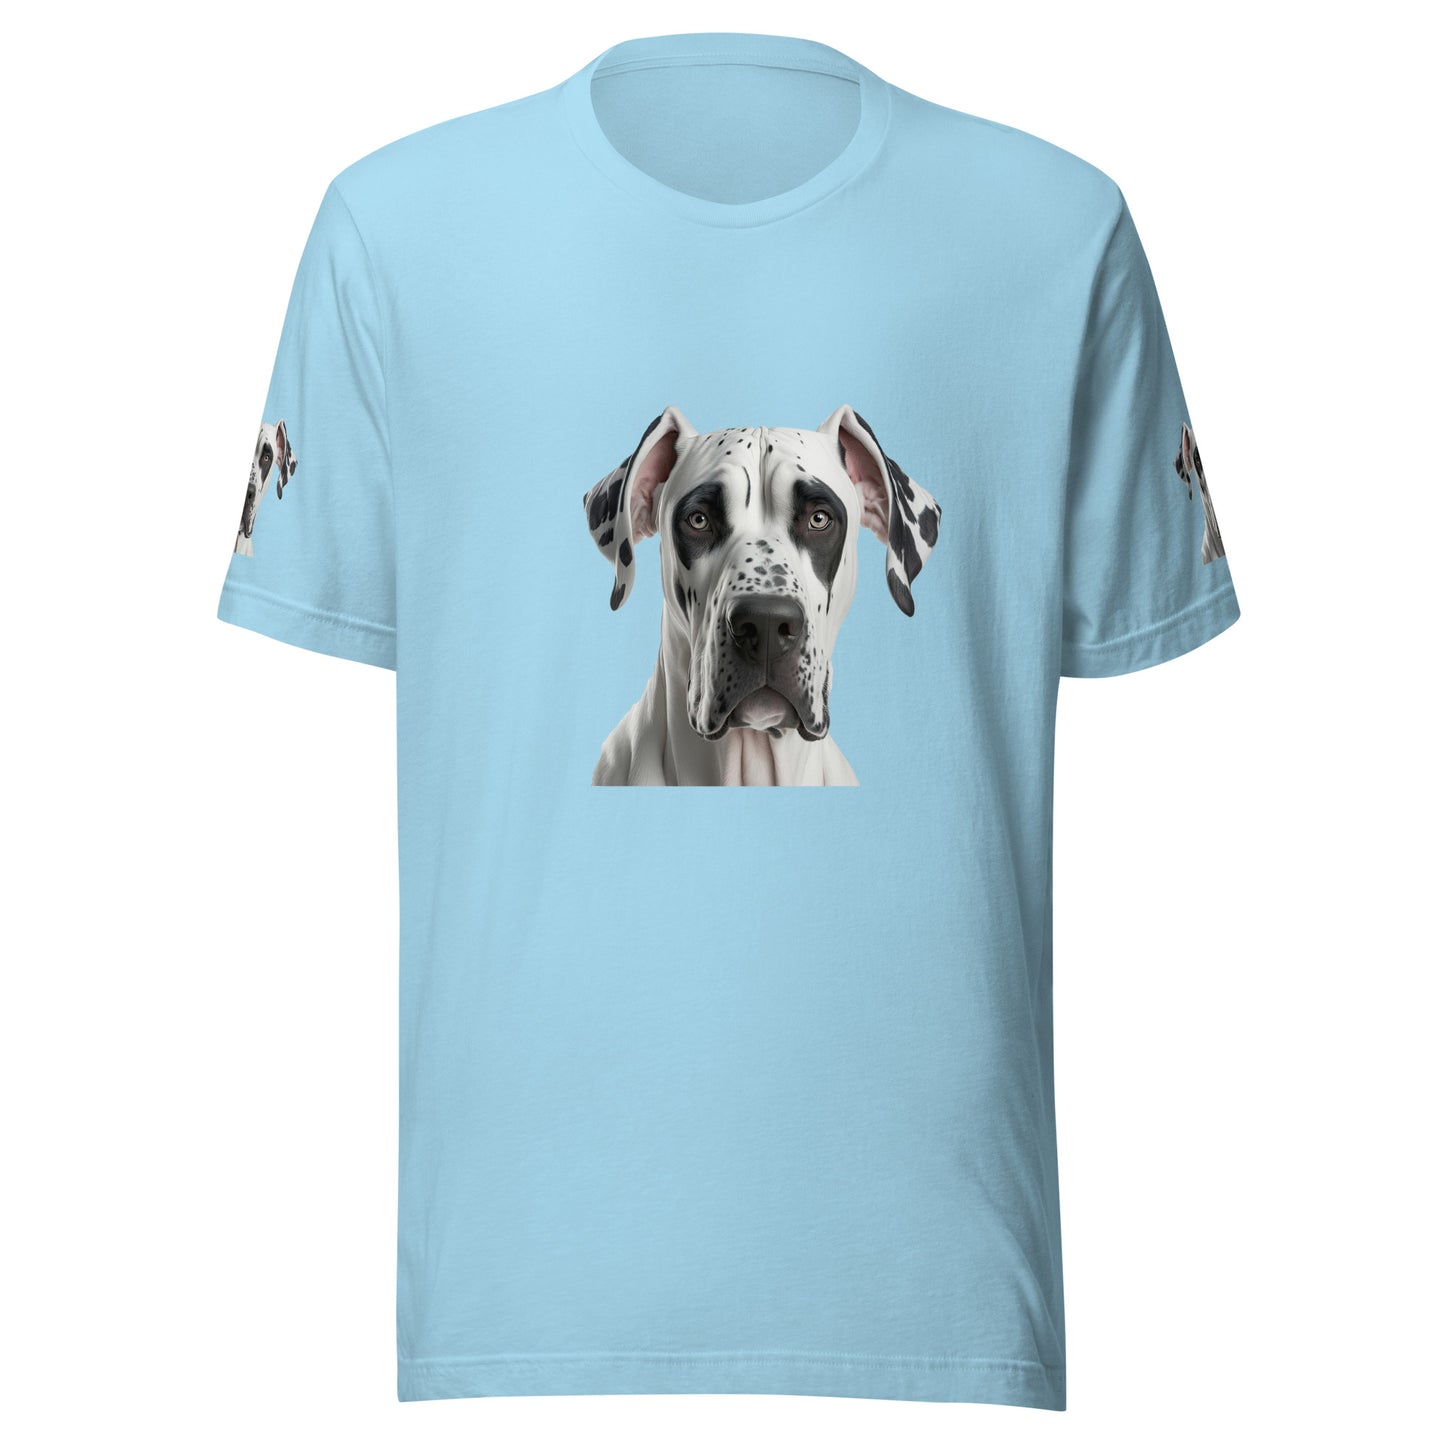 Women and Men's (Unisex) T-Shirt printed with a portrait of a Great Dane